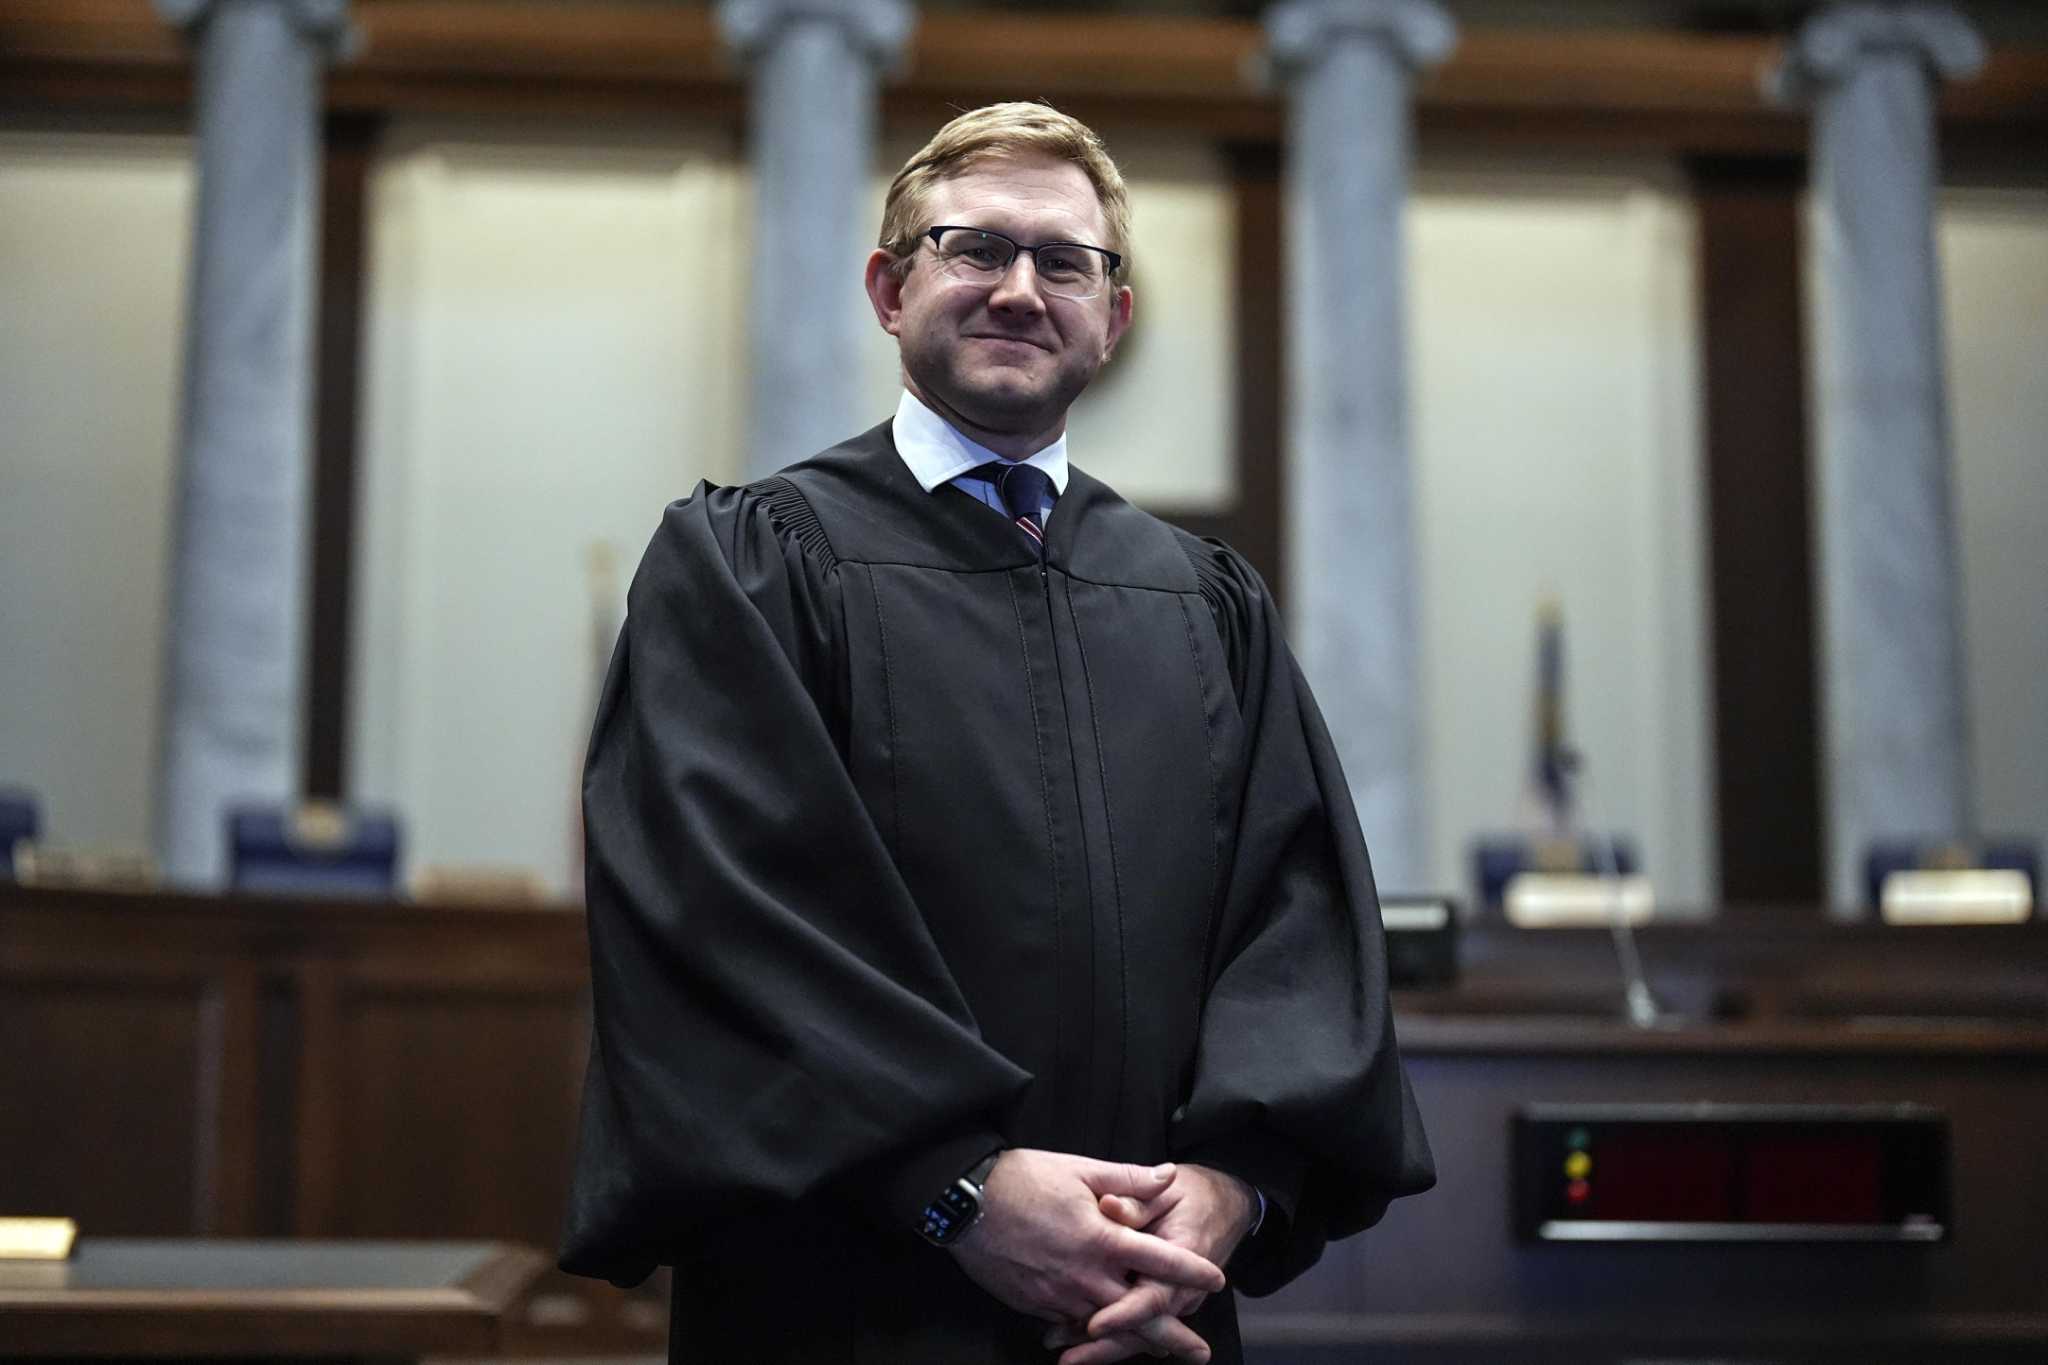 Georgia Justice Andrew Pinson beats challenger as 2 Republicans head to runoff in open US House seat